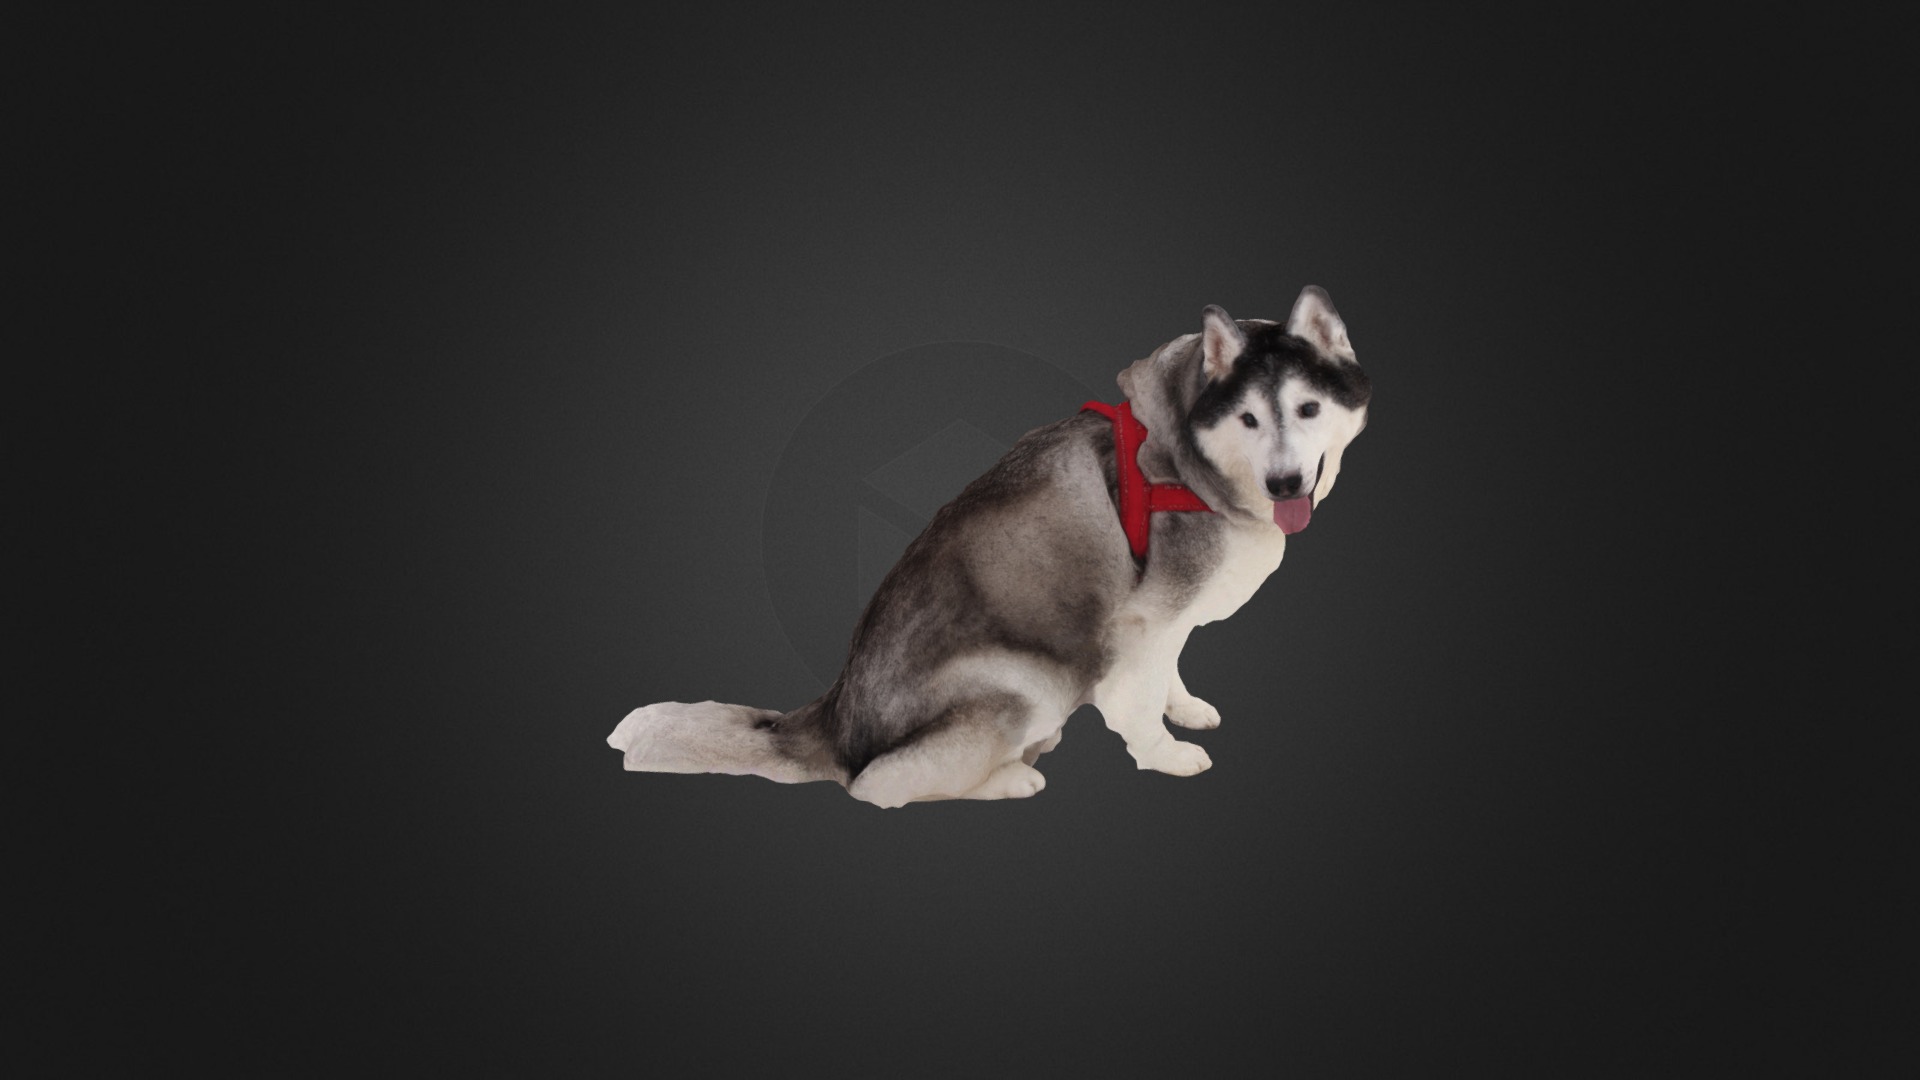 3D model Scanned Husky Dog 898 - This is a 3D model of the Scanned Husky Dog 898. The 3D model is about a dog with a red collar.